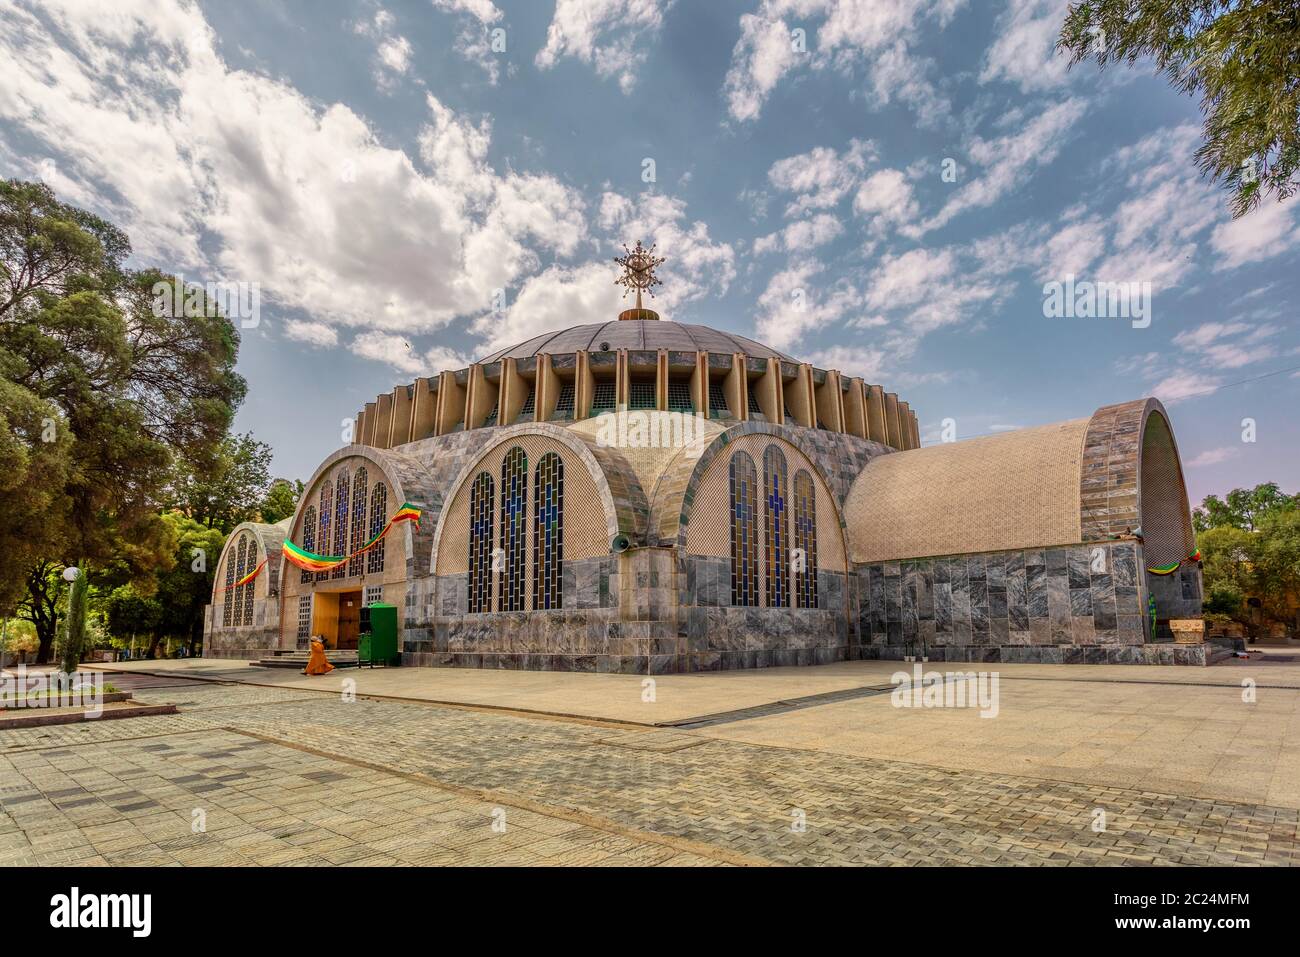 Famous cultural heritage Church of Our Lady of Zion in Axum. Ethiopian Orthodox Tewahedo Church built by Emperor Haile Selassie Stock Photo